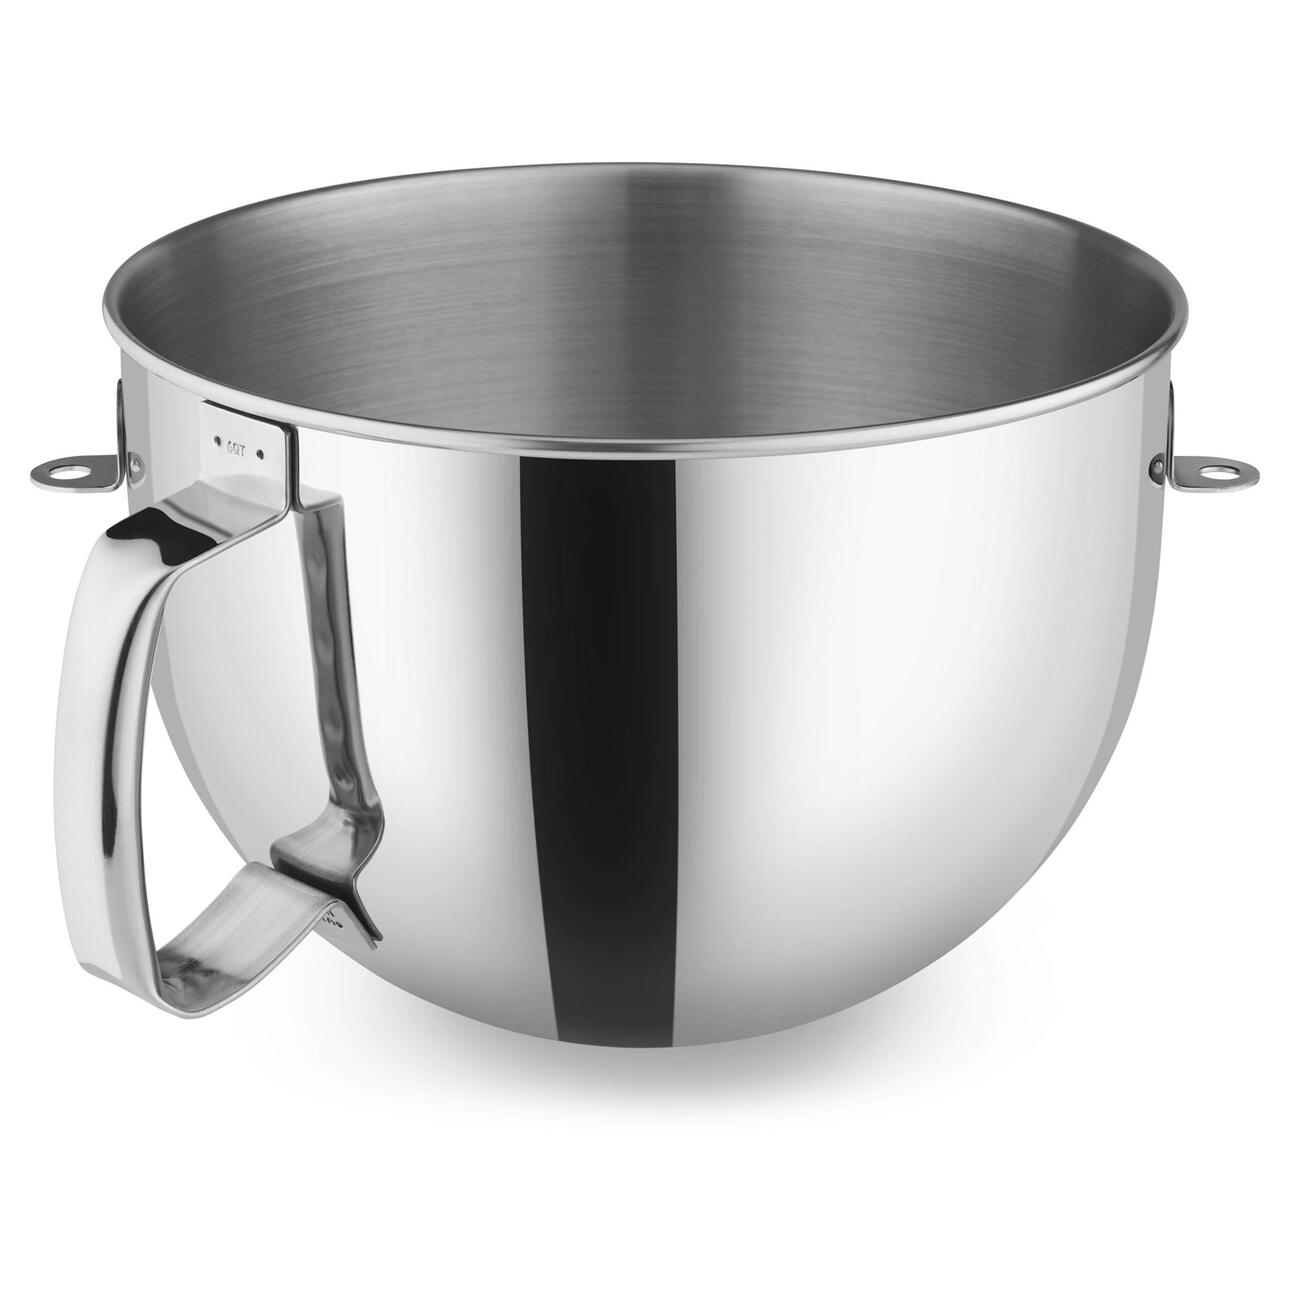 KitchenAid 6 Quart Bowl-Lift Polished Stainless Steel Bowl with Comfortable Handle - KN2B6PEH - image 1 of 3